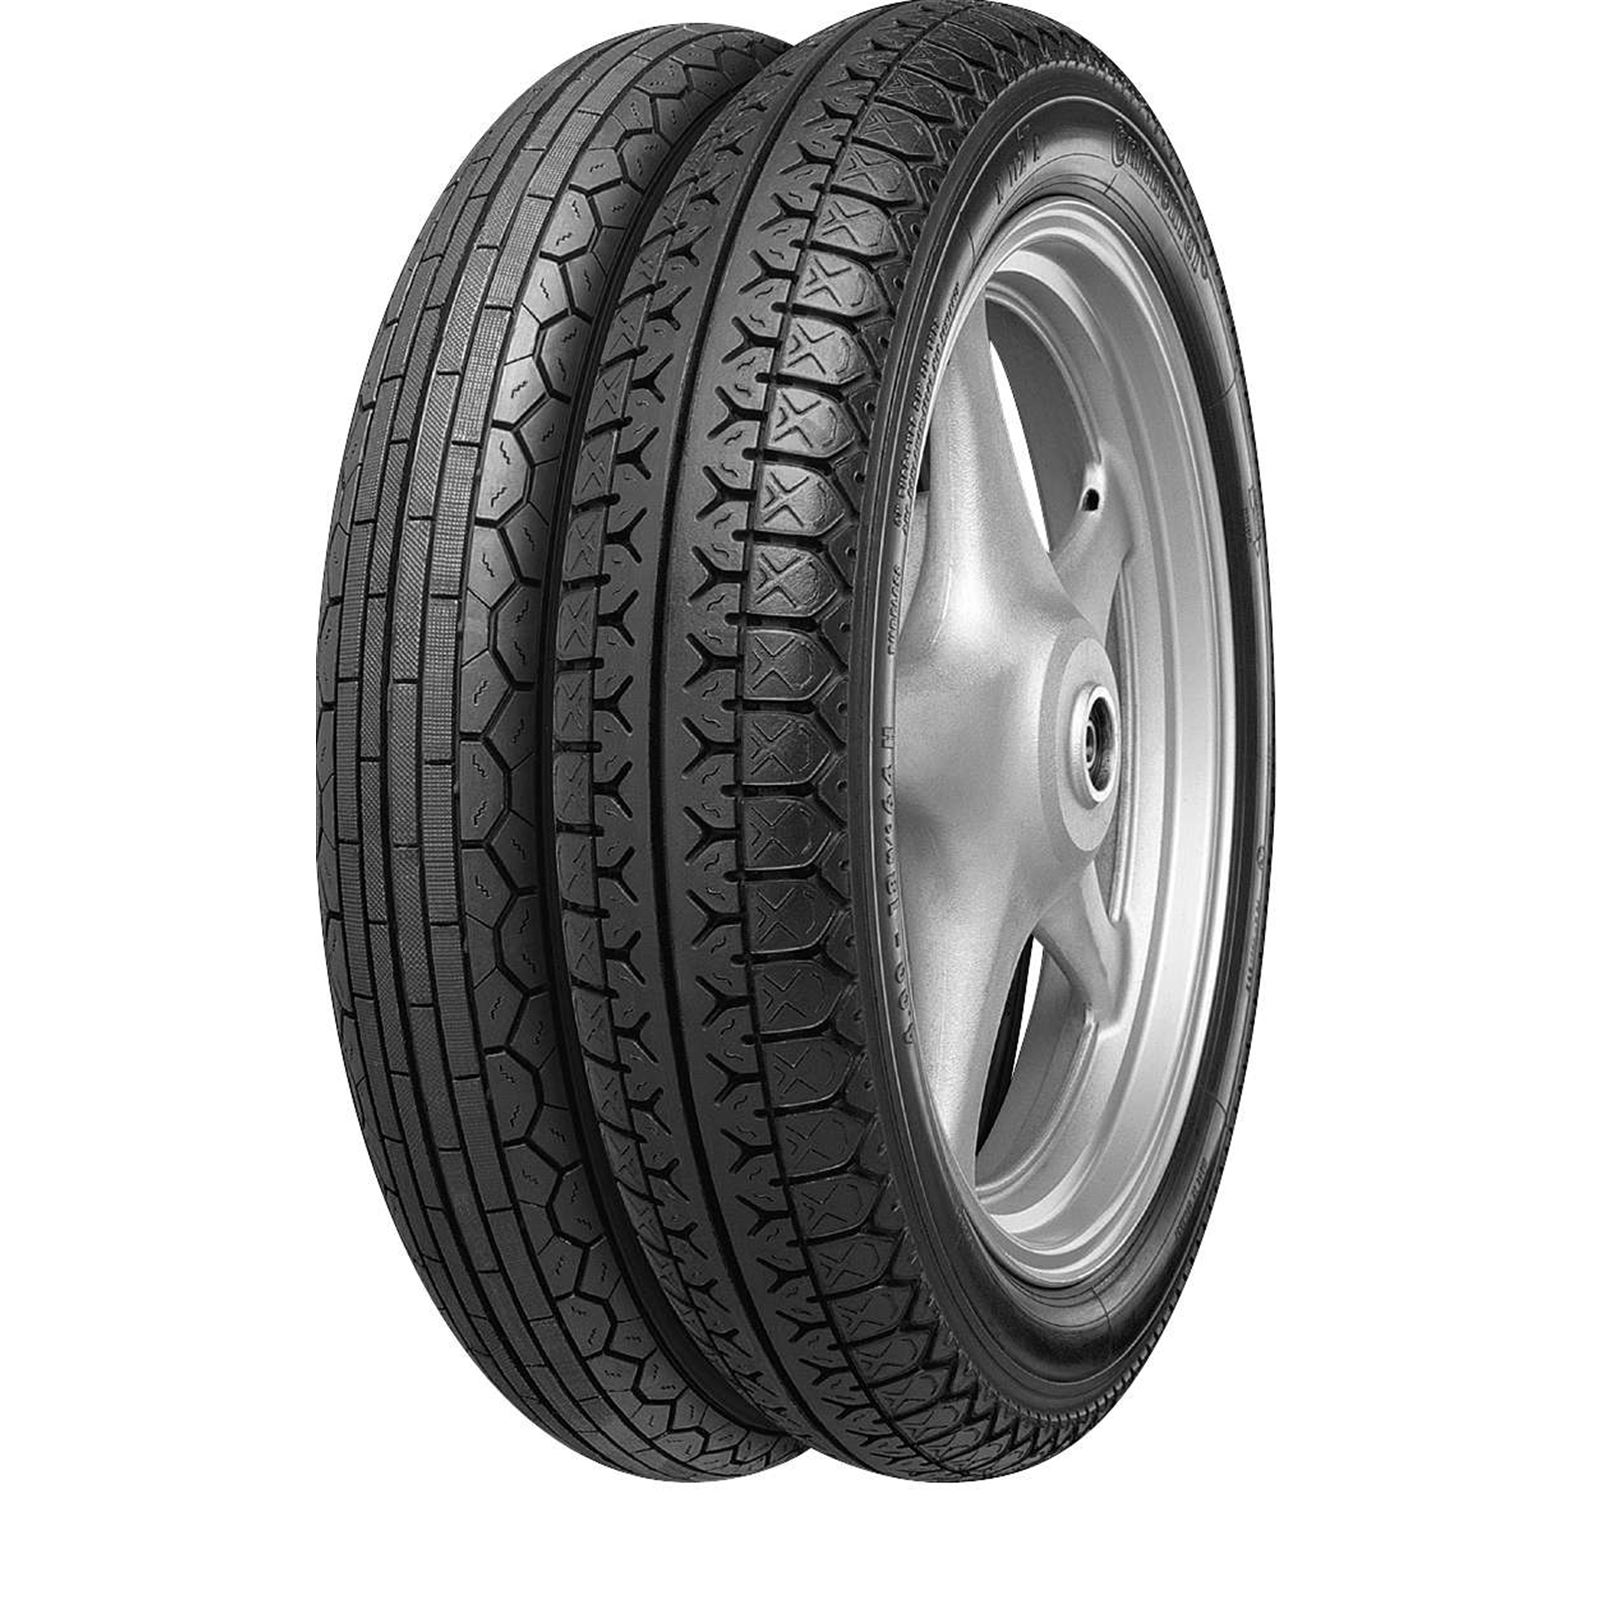 Continental Tire Twins RB2/K112 Classic Tire Twin RB2, 3.25-19, Bias, Front, 54H